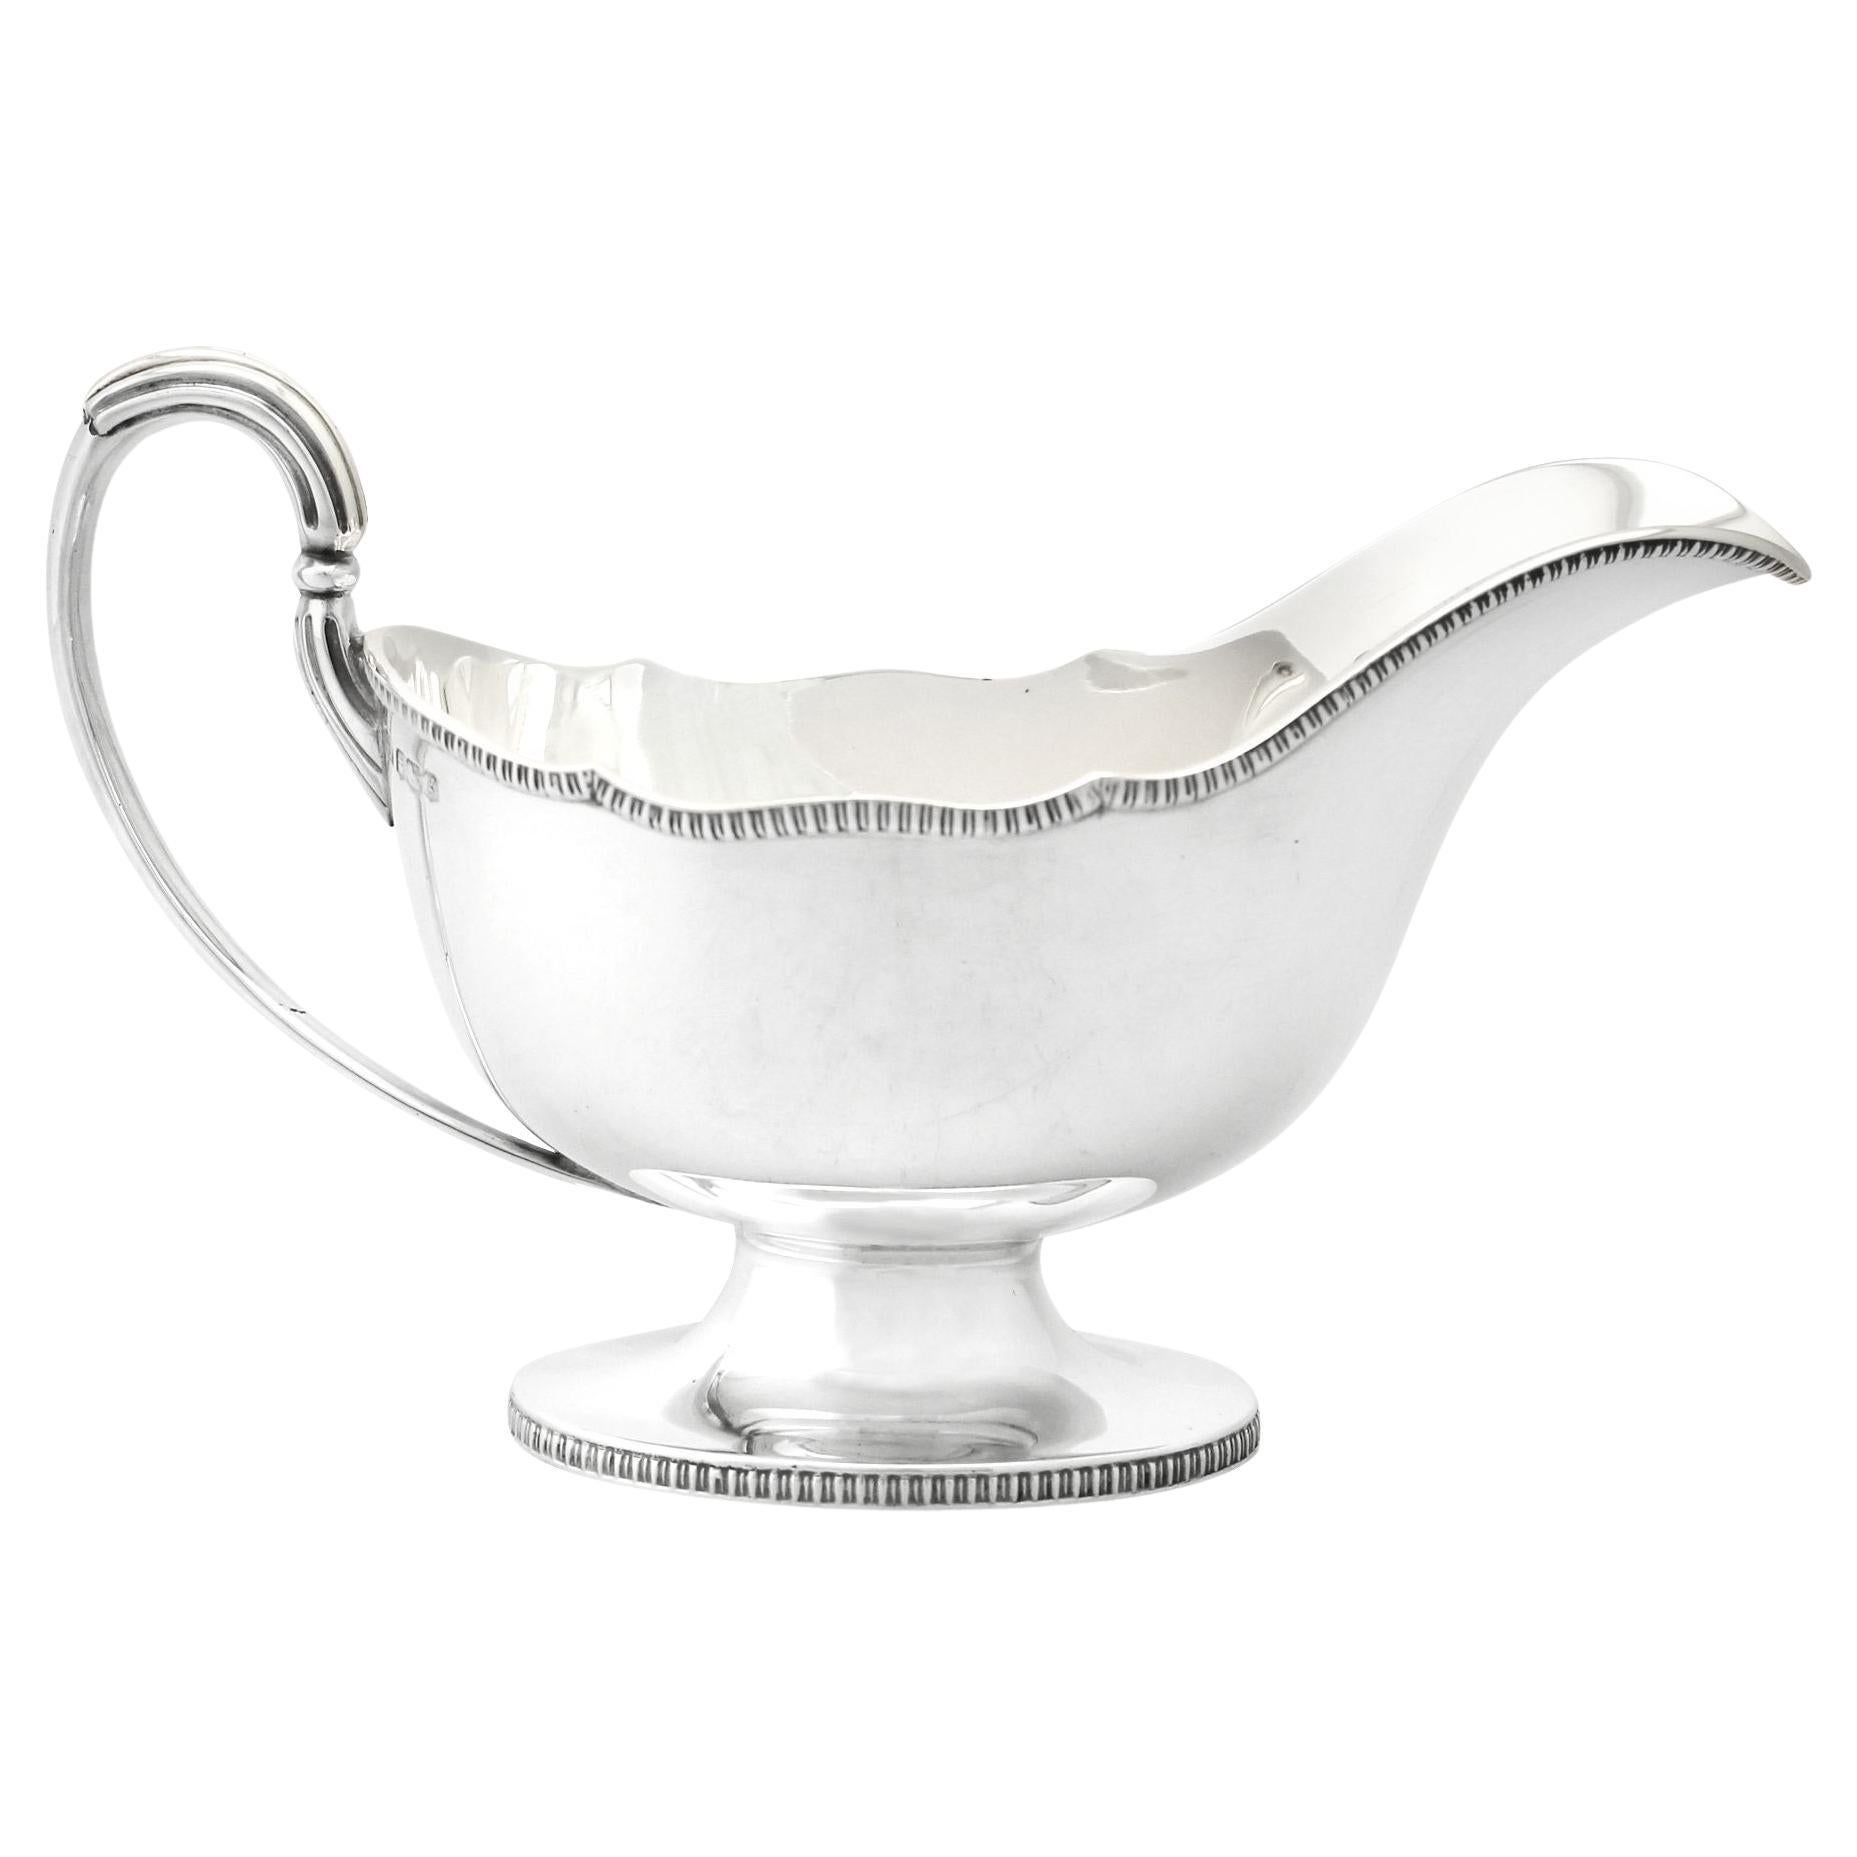 Antique Sterling Silver Sauce / Gravy Boat